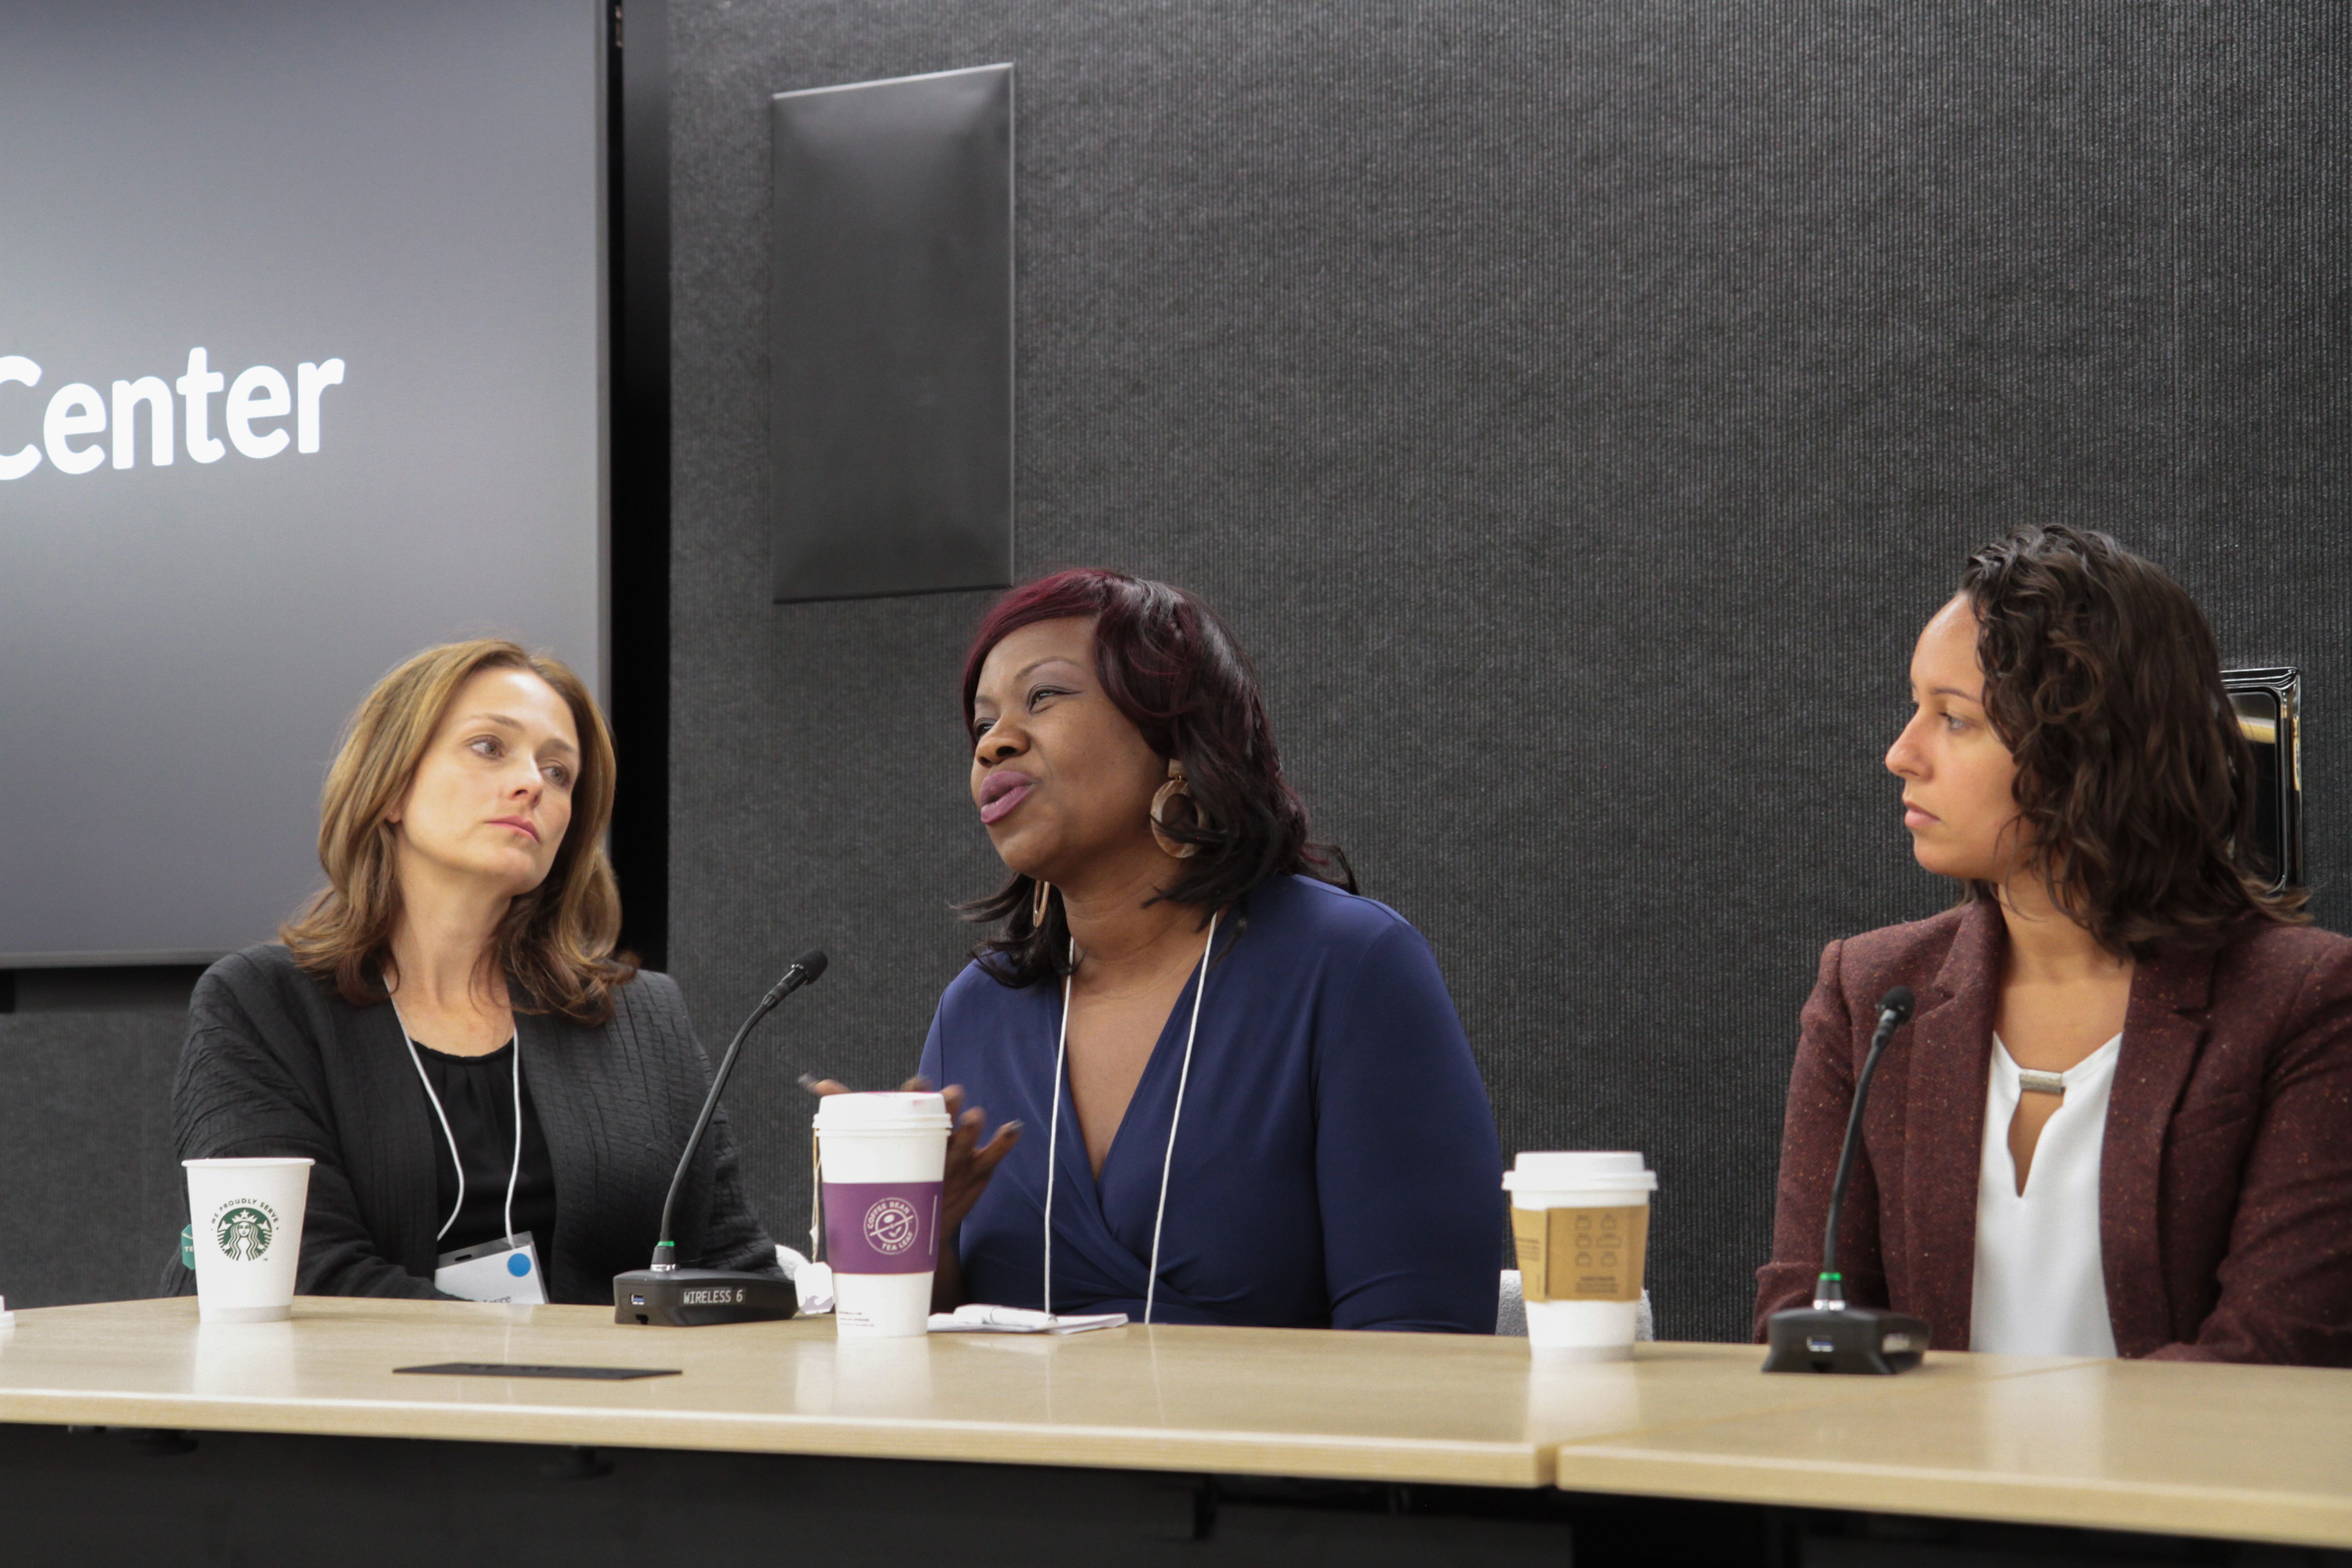 Miami Herald correspondent Jacqueline Charles answers a question from the fellows. Image by Libby Moeller. United States 2019.